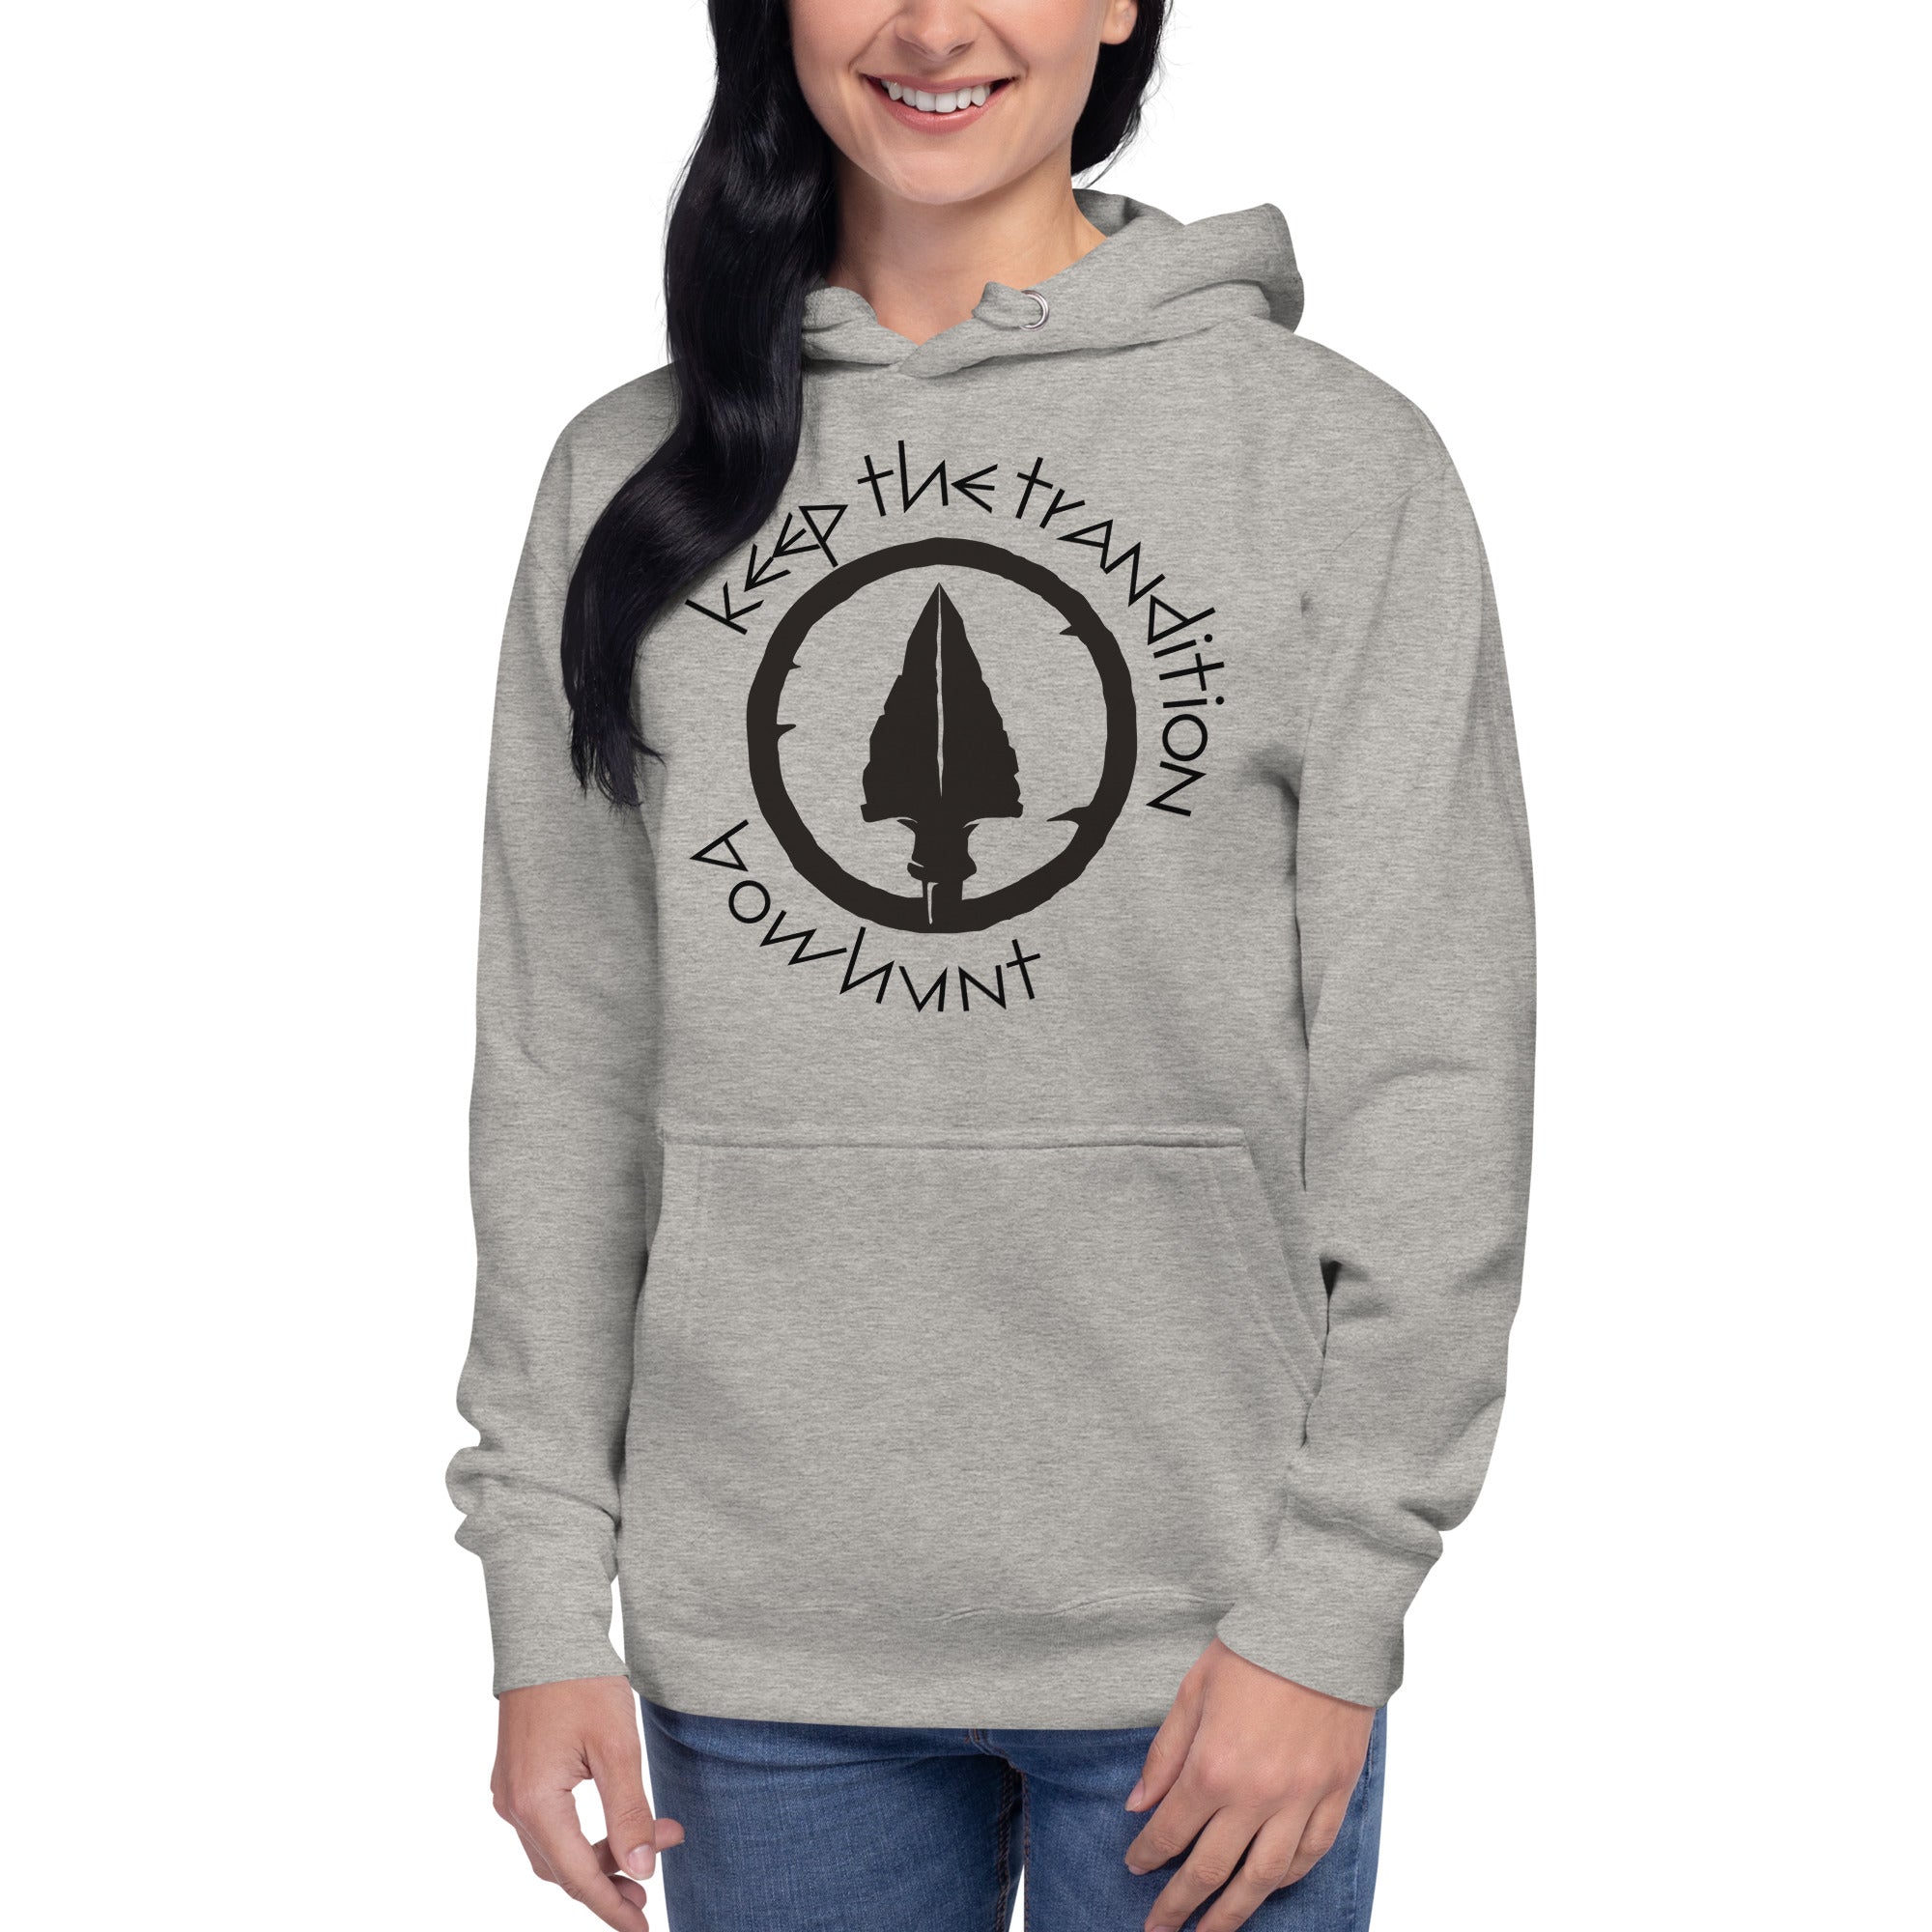 Keep The Tradition Women's Heavy Hoodie - Bow Hunt